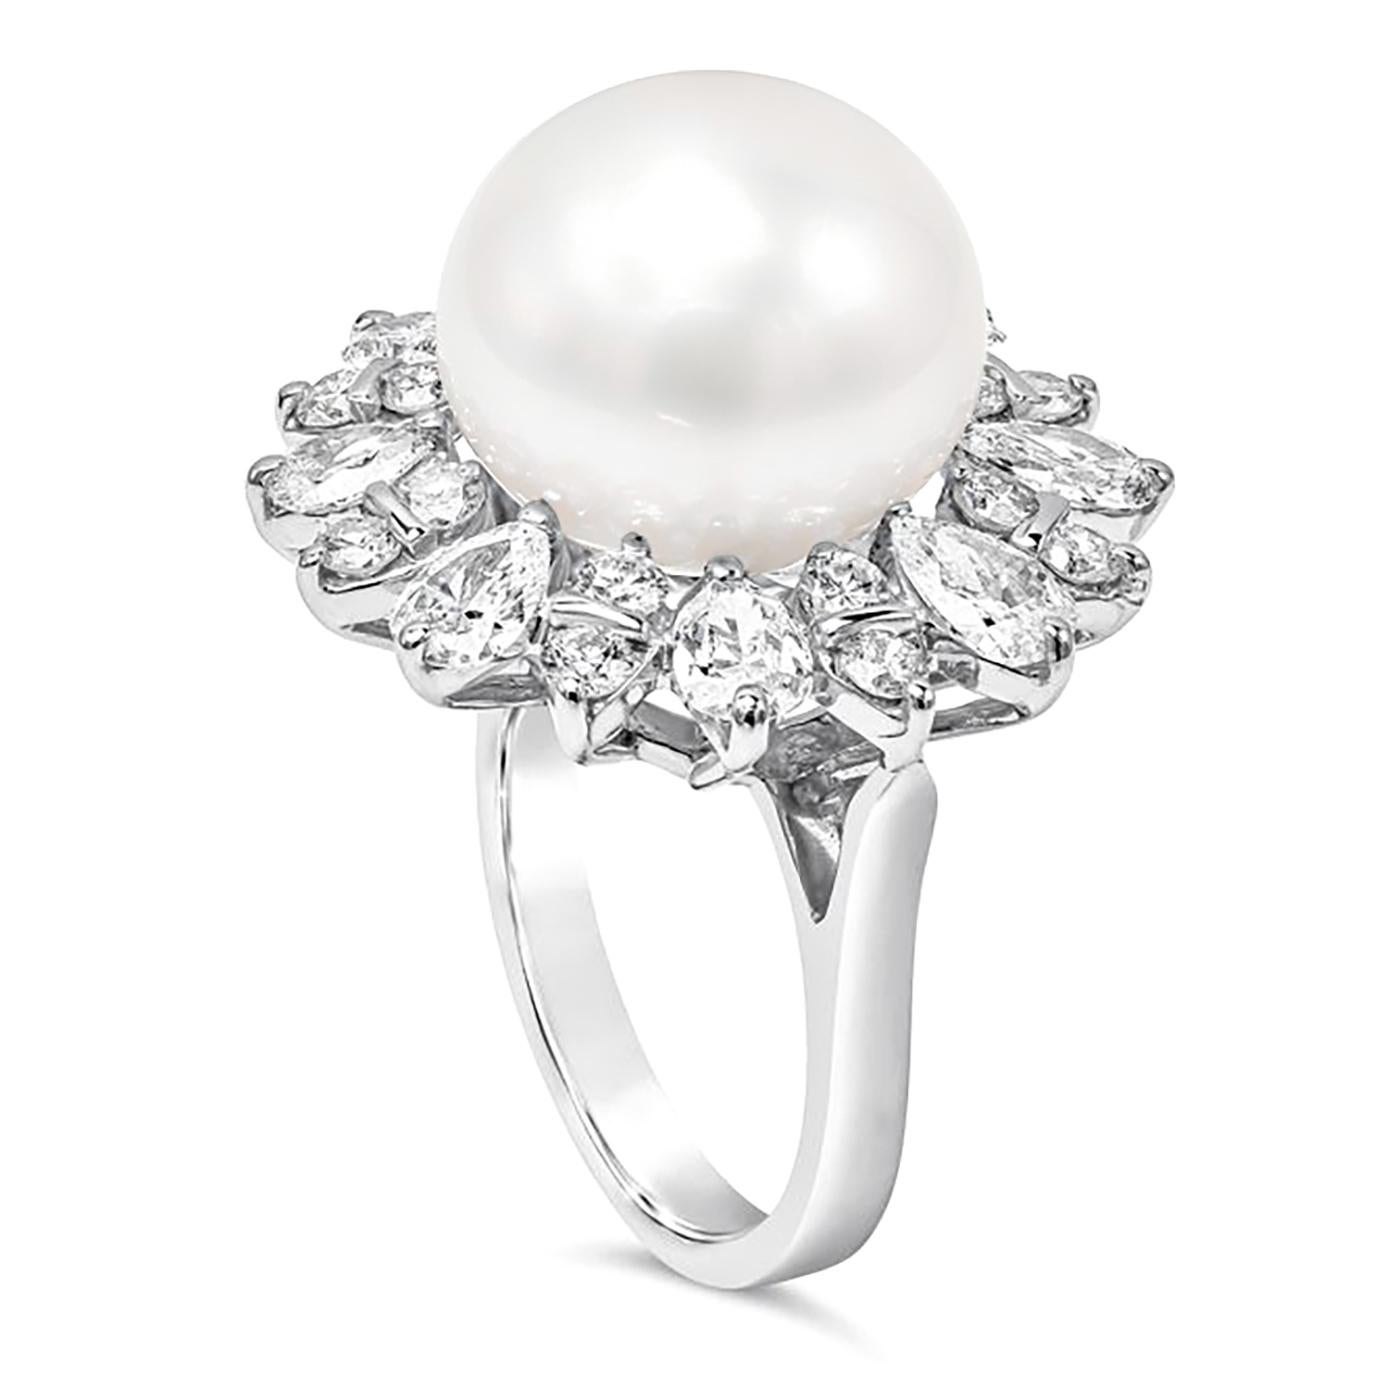 A beautiful cocktail ring showcasing a 14.50mm white south sea pearl, set in a brilliant diamond halo made of pear shape and round diamonds. diamonds weigh 4.60 carats total, Set and made in 18K White Gold. Size 6.75 US resizable upon